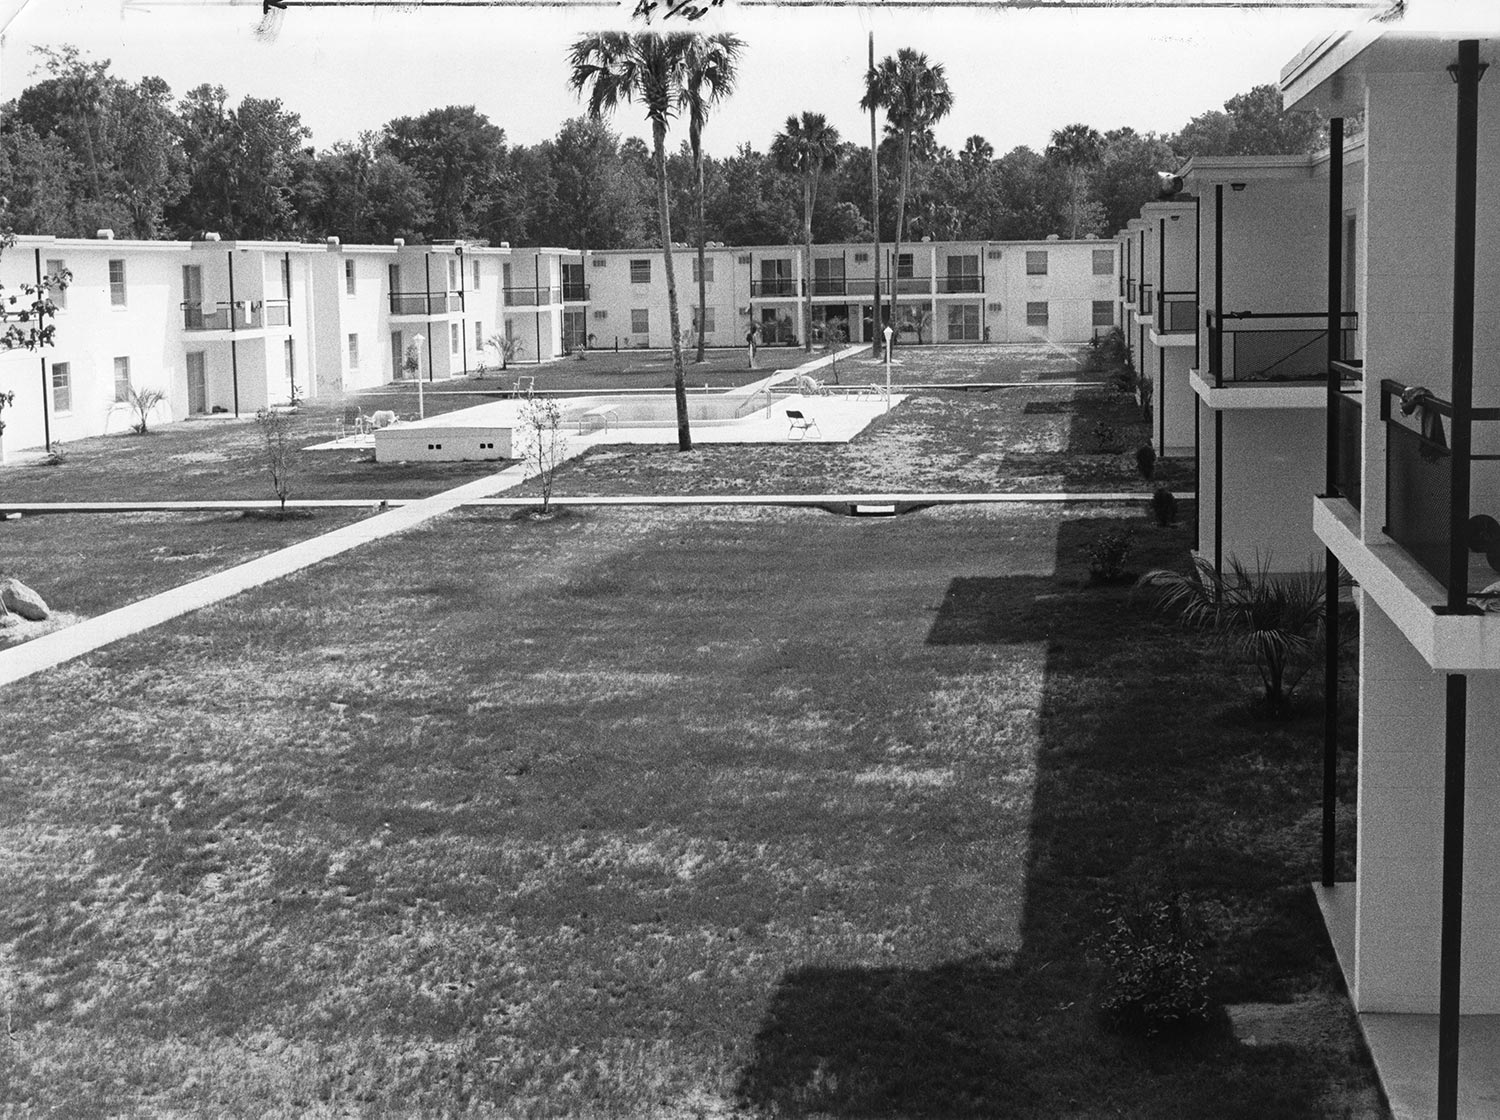 a black and white photo of an old dorm and courtyard